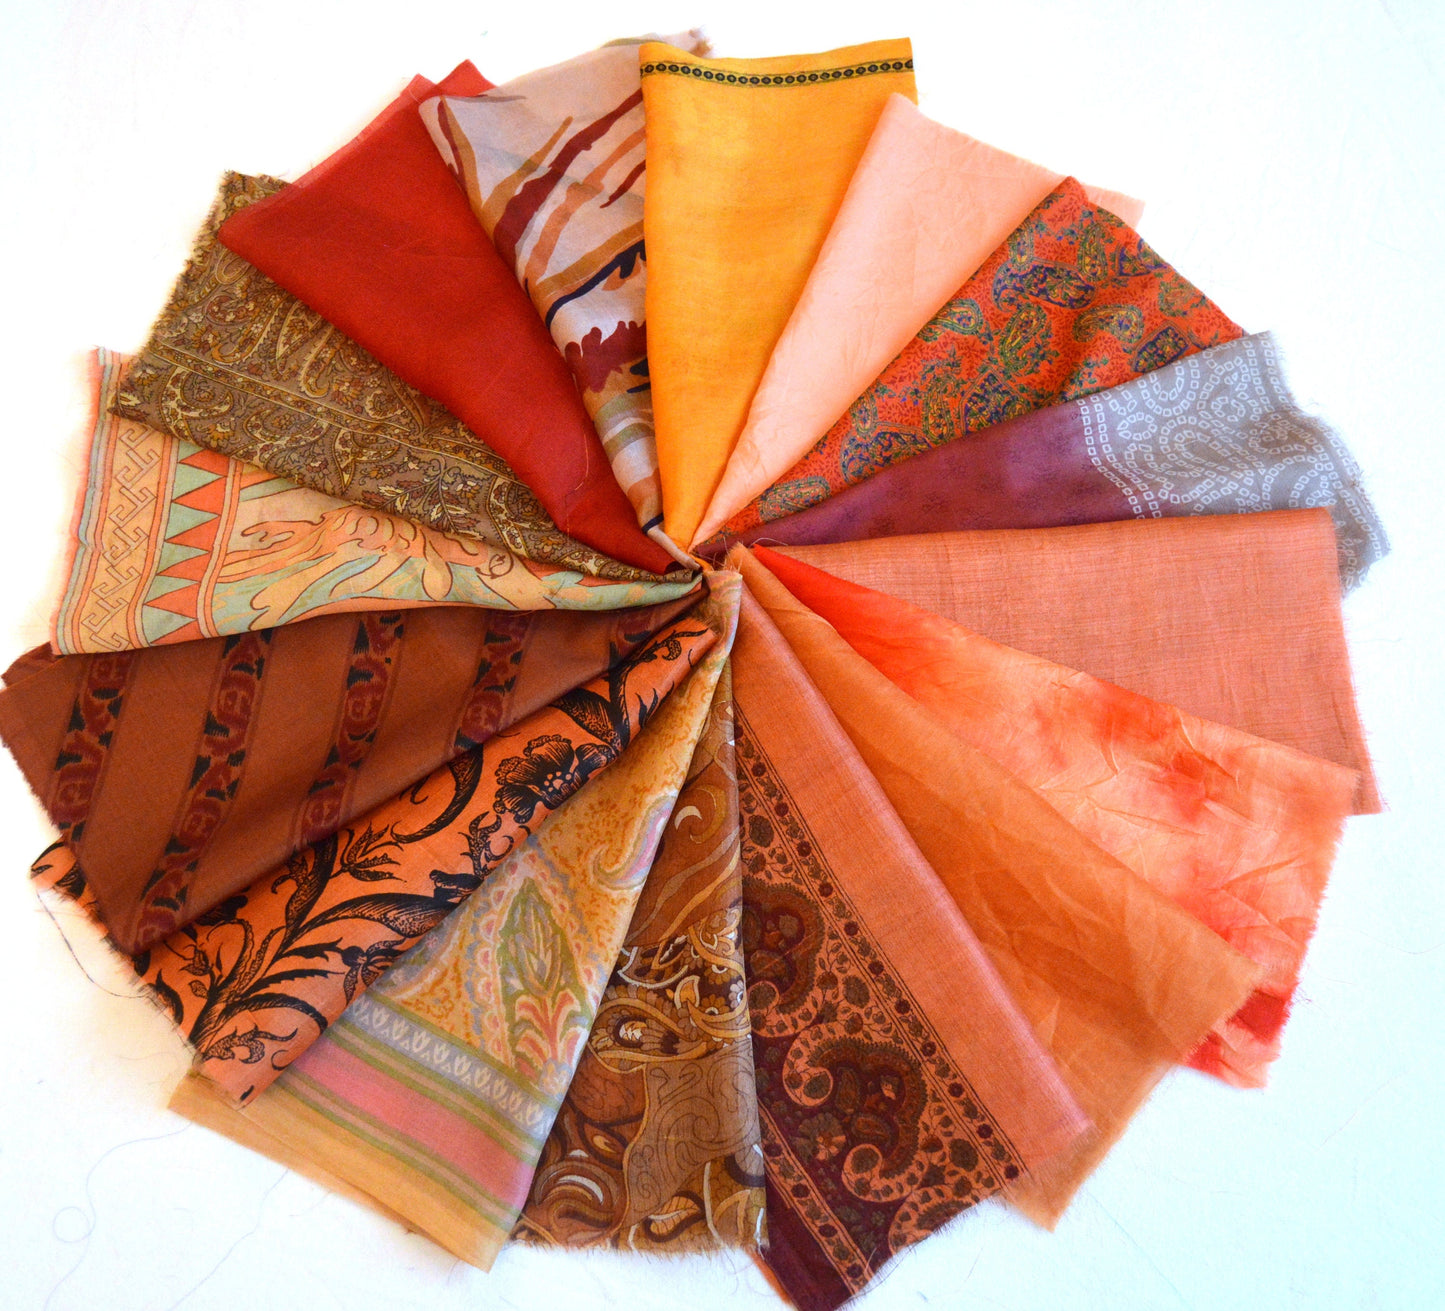 10 Inch x 16 Pieces Recycled Vintage Silk Sari Scraps Remnants Craft Fabric Card Making Collage Mixed Media Textile Art Sewing Junk Journals